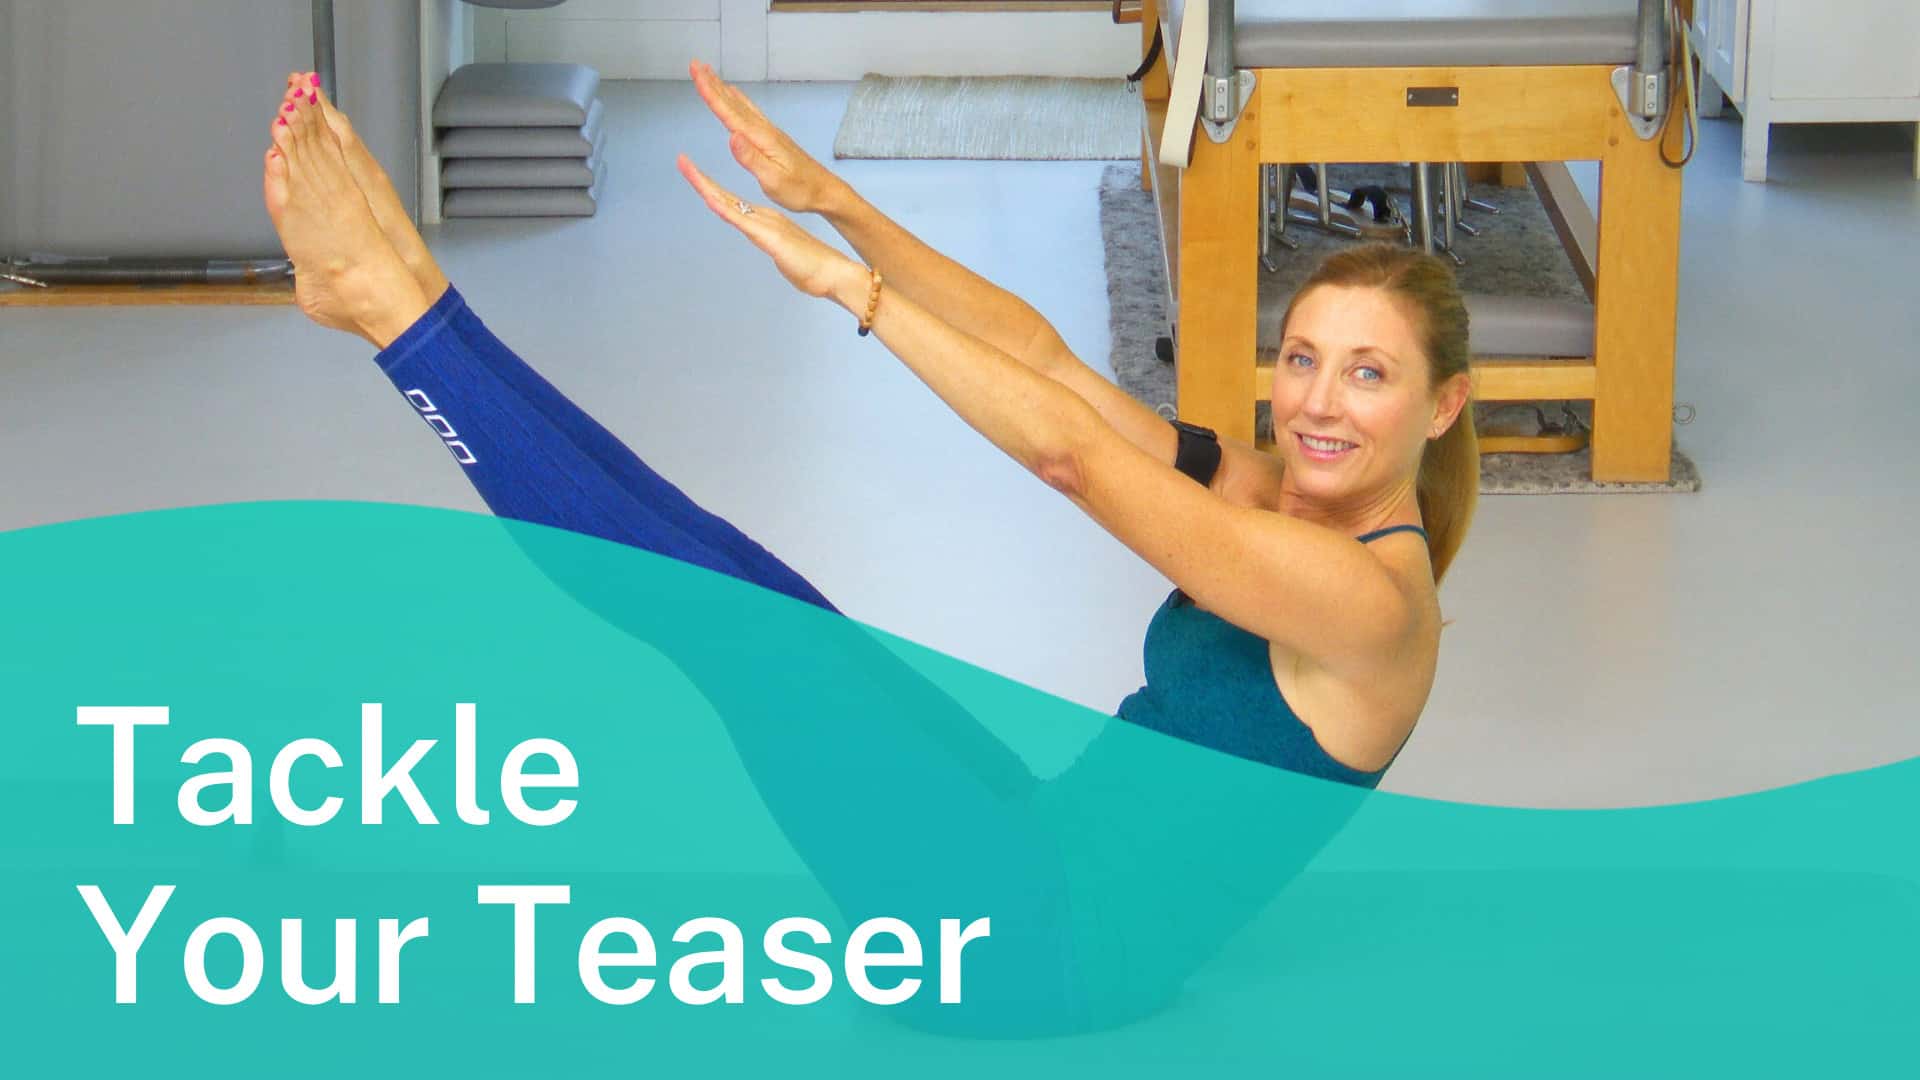 7 Workouts to Tackle Your Teaser